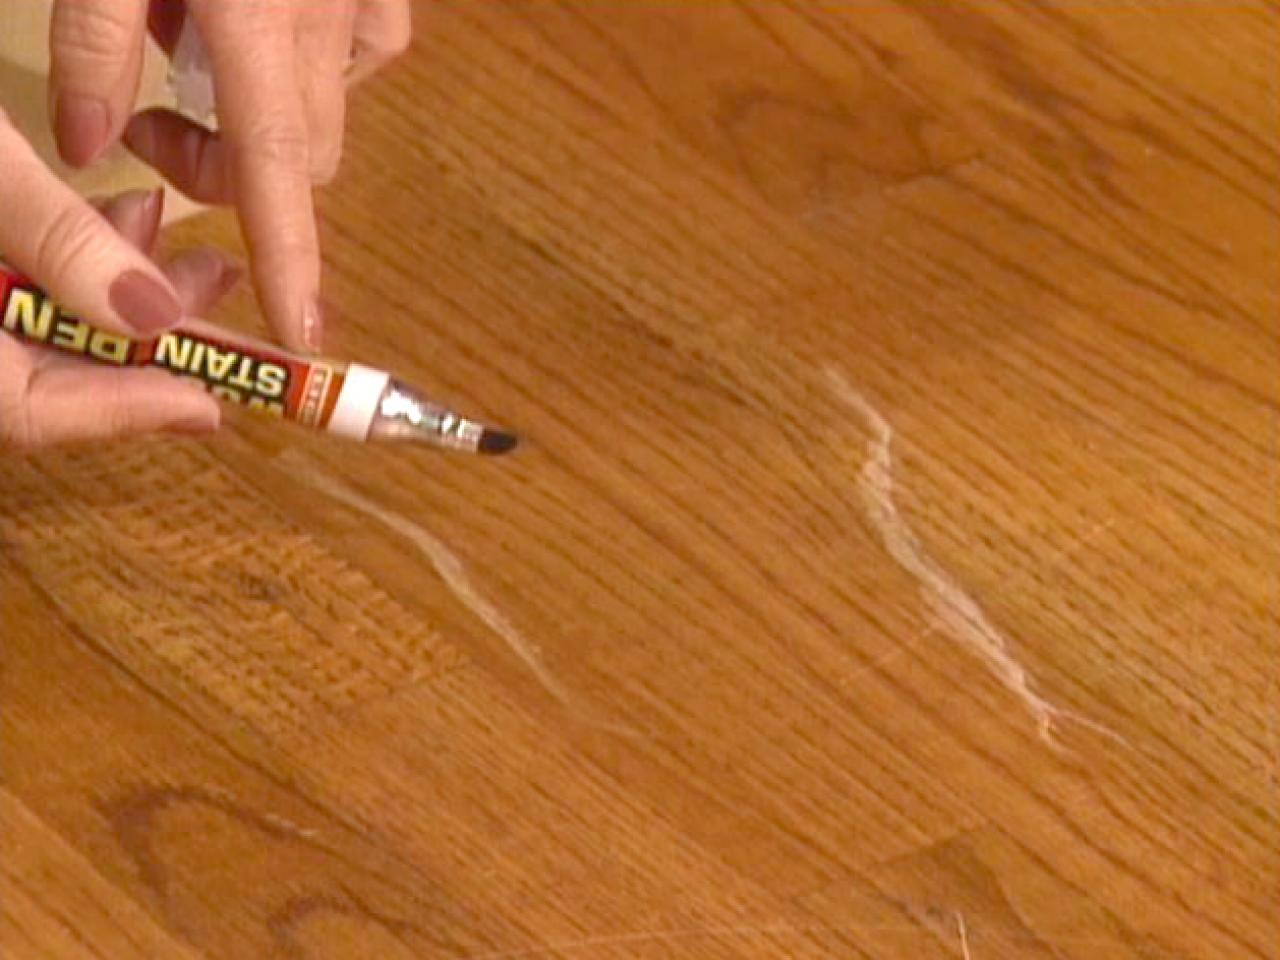 How To Touch Up Wood Floors Tos Diy, Hardwood Floor Polyurethane Remover